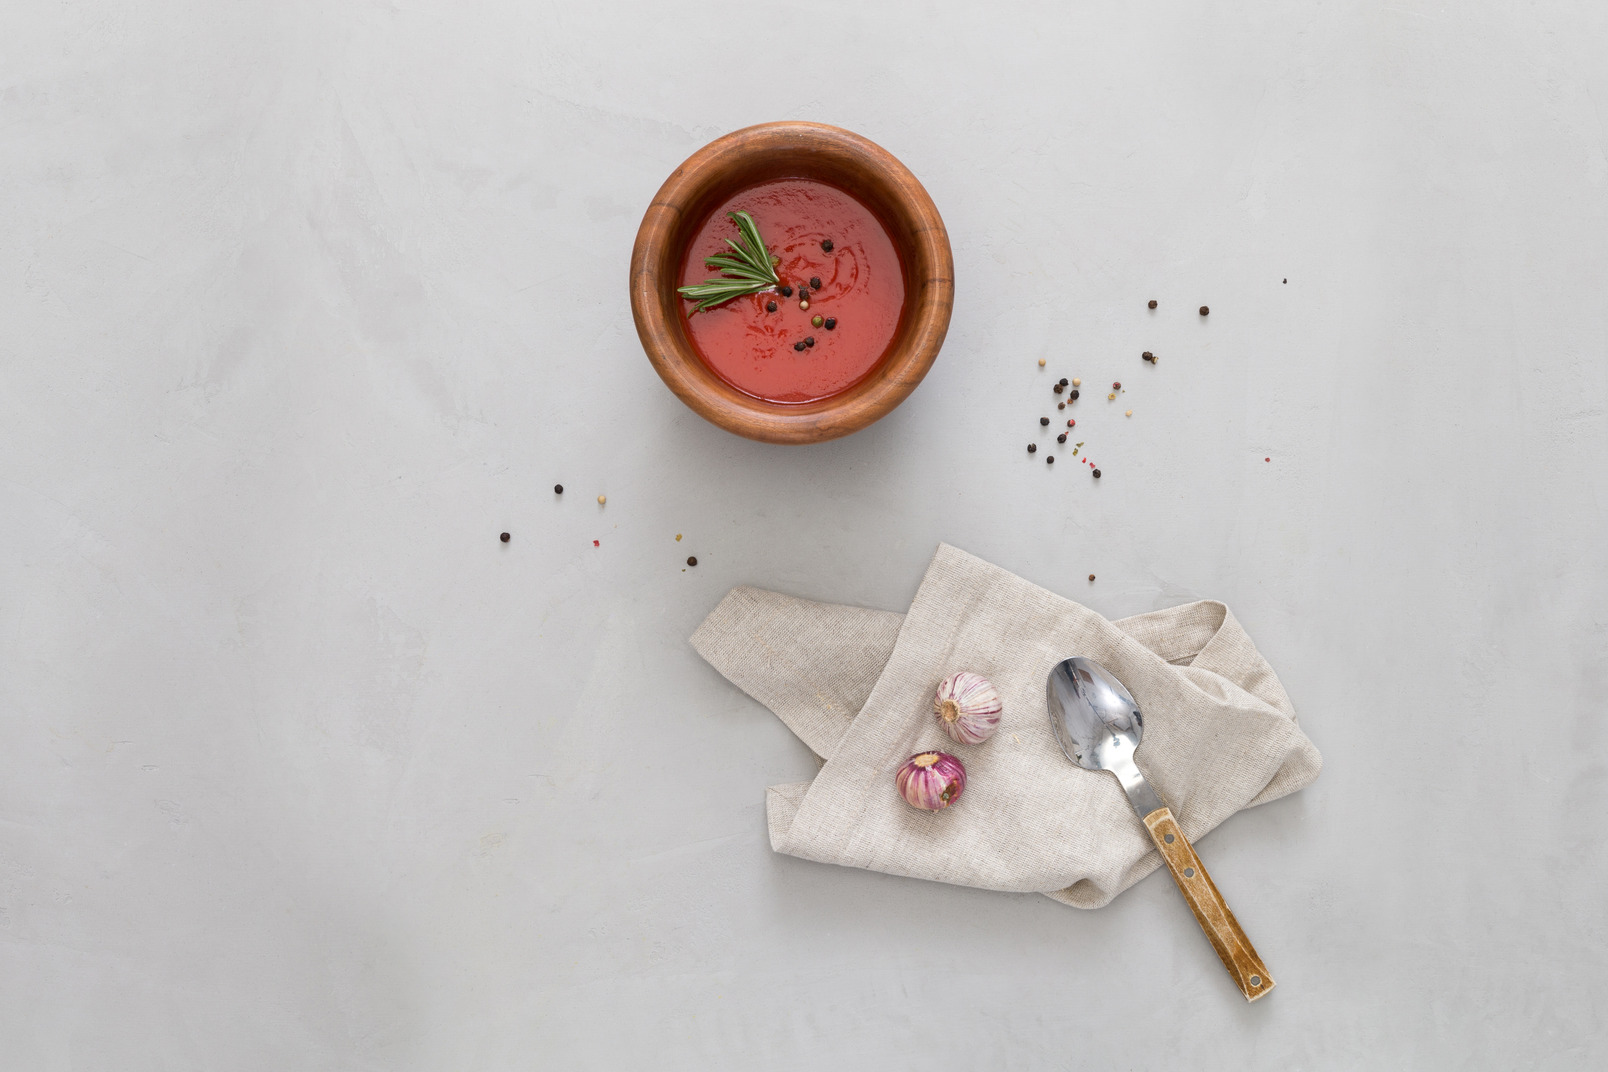 A bowl of gazpacho, some garlic and a spoon